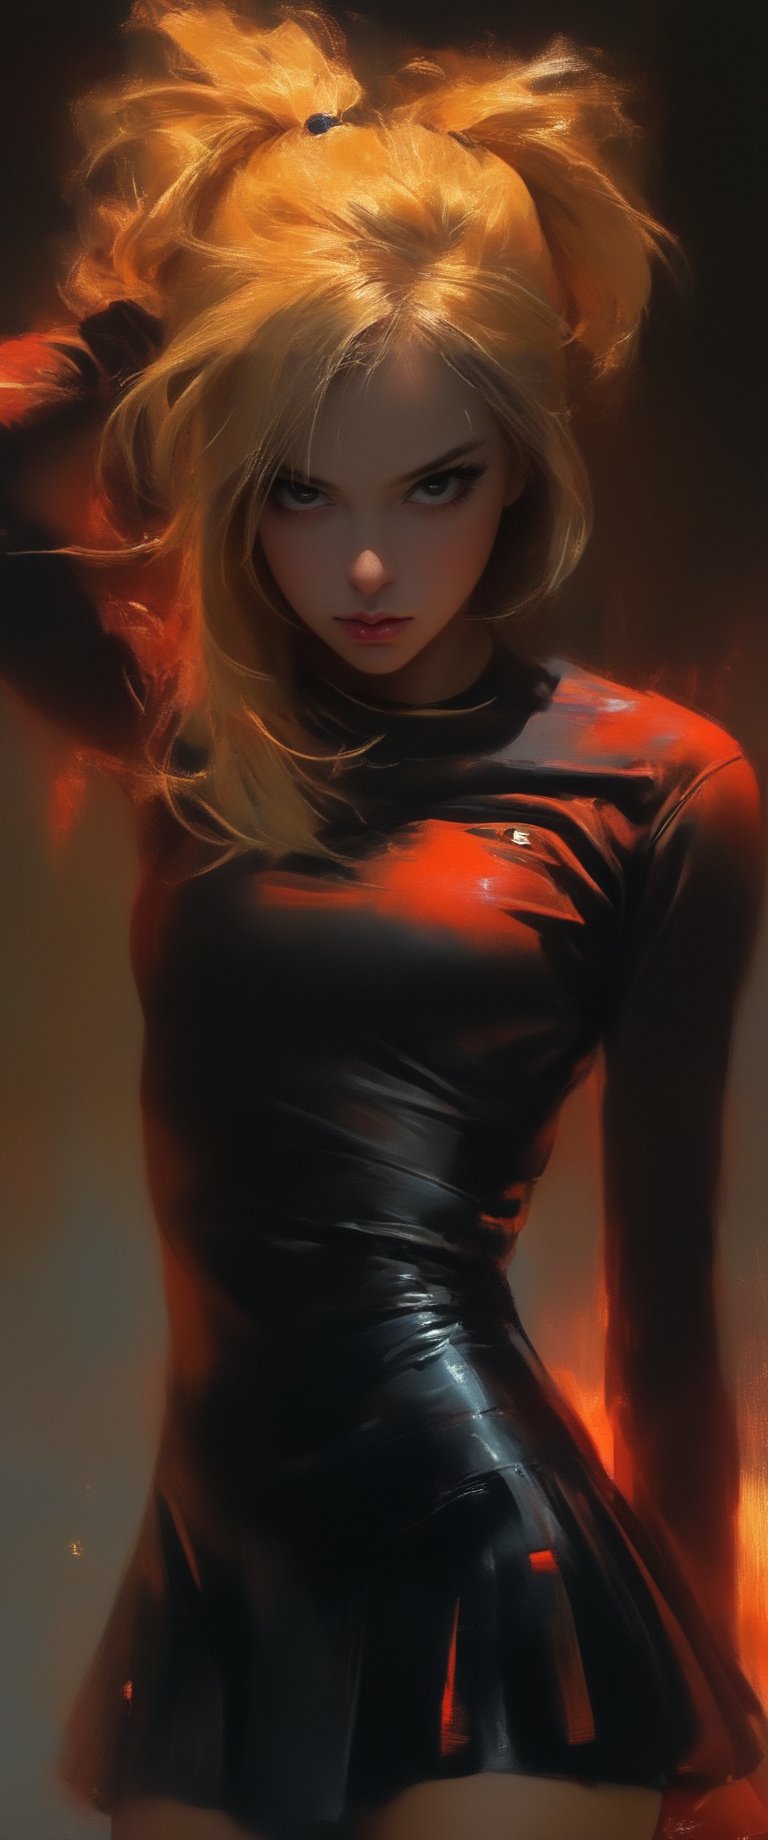 breathtaking ethereal RAW photo of female ((poster of a sexy [dark cheerleader, in a latex cheerleadre uniform, ] in a [ text(CTMAKER:1.5)], pissed_off,angry, latex uniform, eye angle view, ,dark anim,minsi,goeun, , , )), dark and moody style, perfect face, outstretched perfect hands . masterpiece, professional, award-winning, intricate details, ultra high detailed, 64k, dramatic light, volumetric light, dynamic lighting, Epic, splash art .. ), by james jean $, roby dwi antono $, ross tran $. francis bacon $, michal mraz $, adrian ghenie $, petra cortright $, gerhard richter $, takato yamamoto $, ashley wood, tense atmospheric, , , , sooyaaa,IMGFIX,Comic Book-Style,Movie Aesthetic,action shot,photo r3al,bad quality image,oil painting, cinematic moviemaker style,Japan Vibes,H effect,koh_yunjung ,koh_yunjung,kwon-nara,sooyaaa,colorful,roses_are_rosie,armor,han-hyoju-xl
